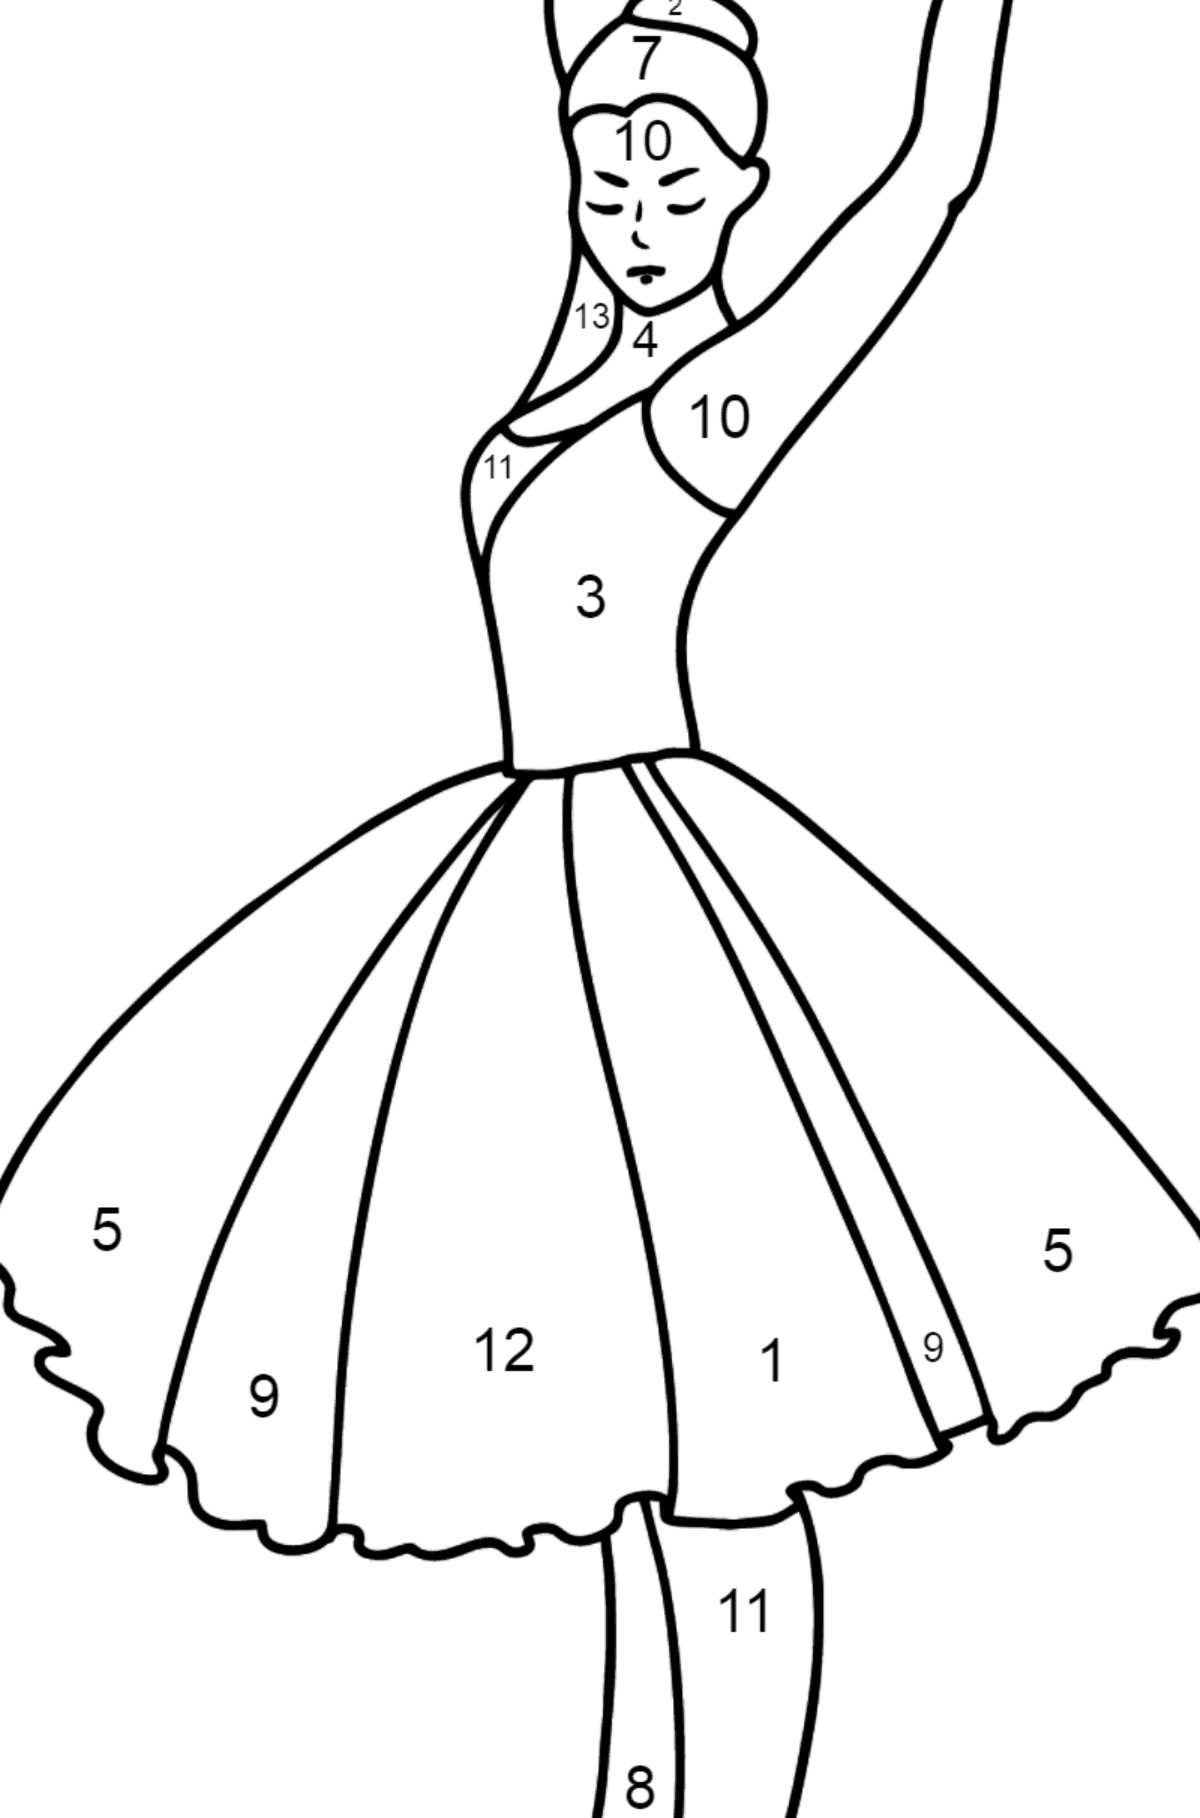 Ballerina Dancing coloring page - Coloring by Numbers for Kids